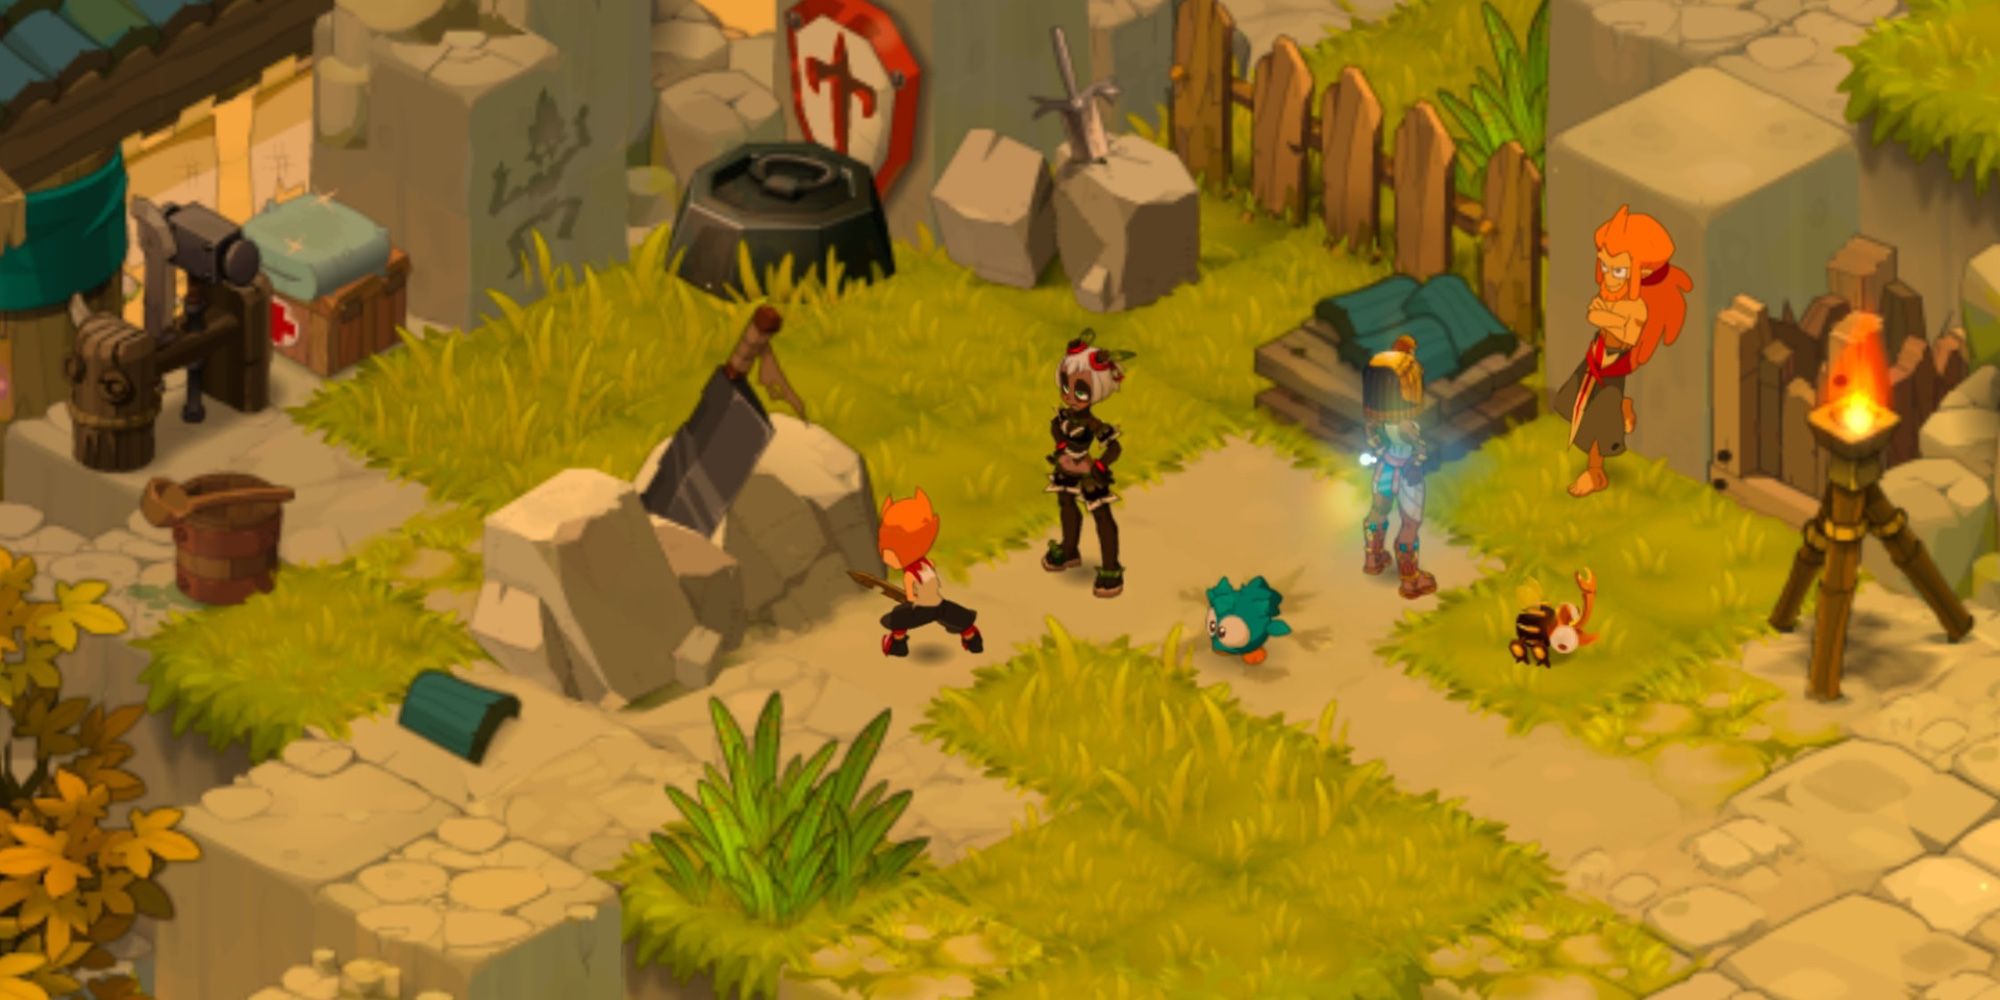 Free-to-play RPGs on Steam - Wakfu - Player breaking stone with sword